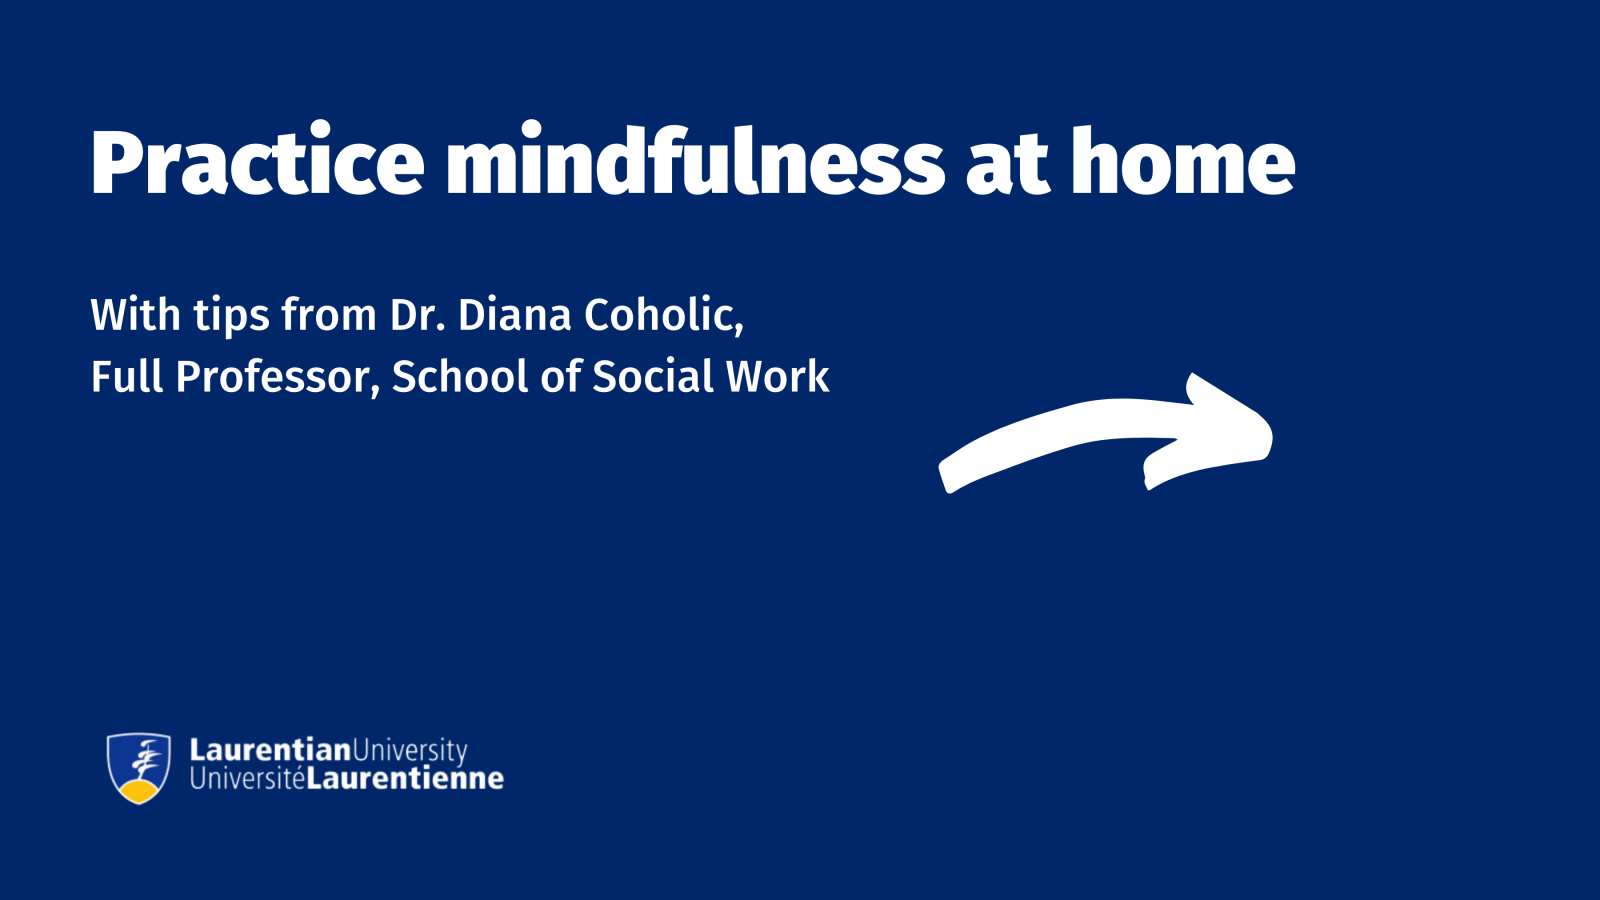 Practice mindfulness at home tips from Dr. Diana Coholic poster